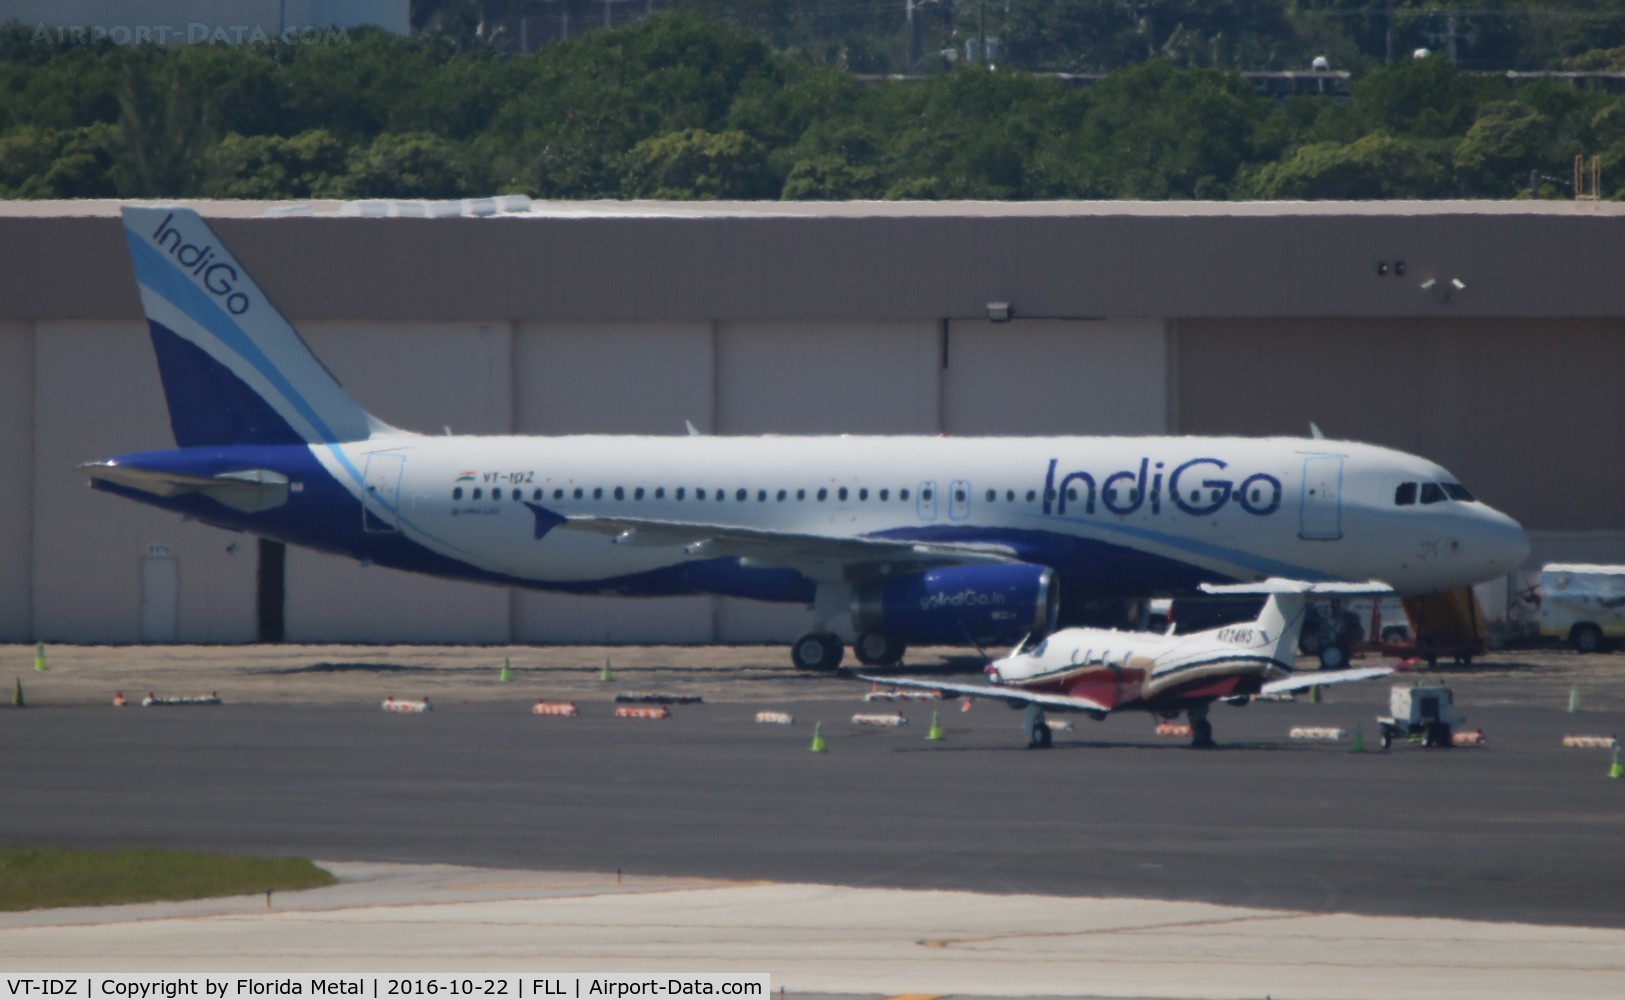 VT-IDZ, 2007 Airbus A320-232 C/N 3264, IndiGO A320 - not the best quality picture, but not something you see every day on this side of the world